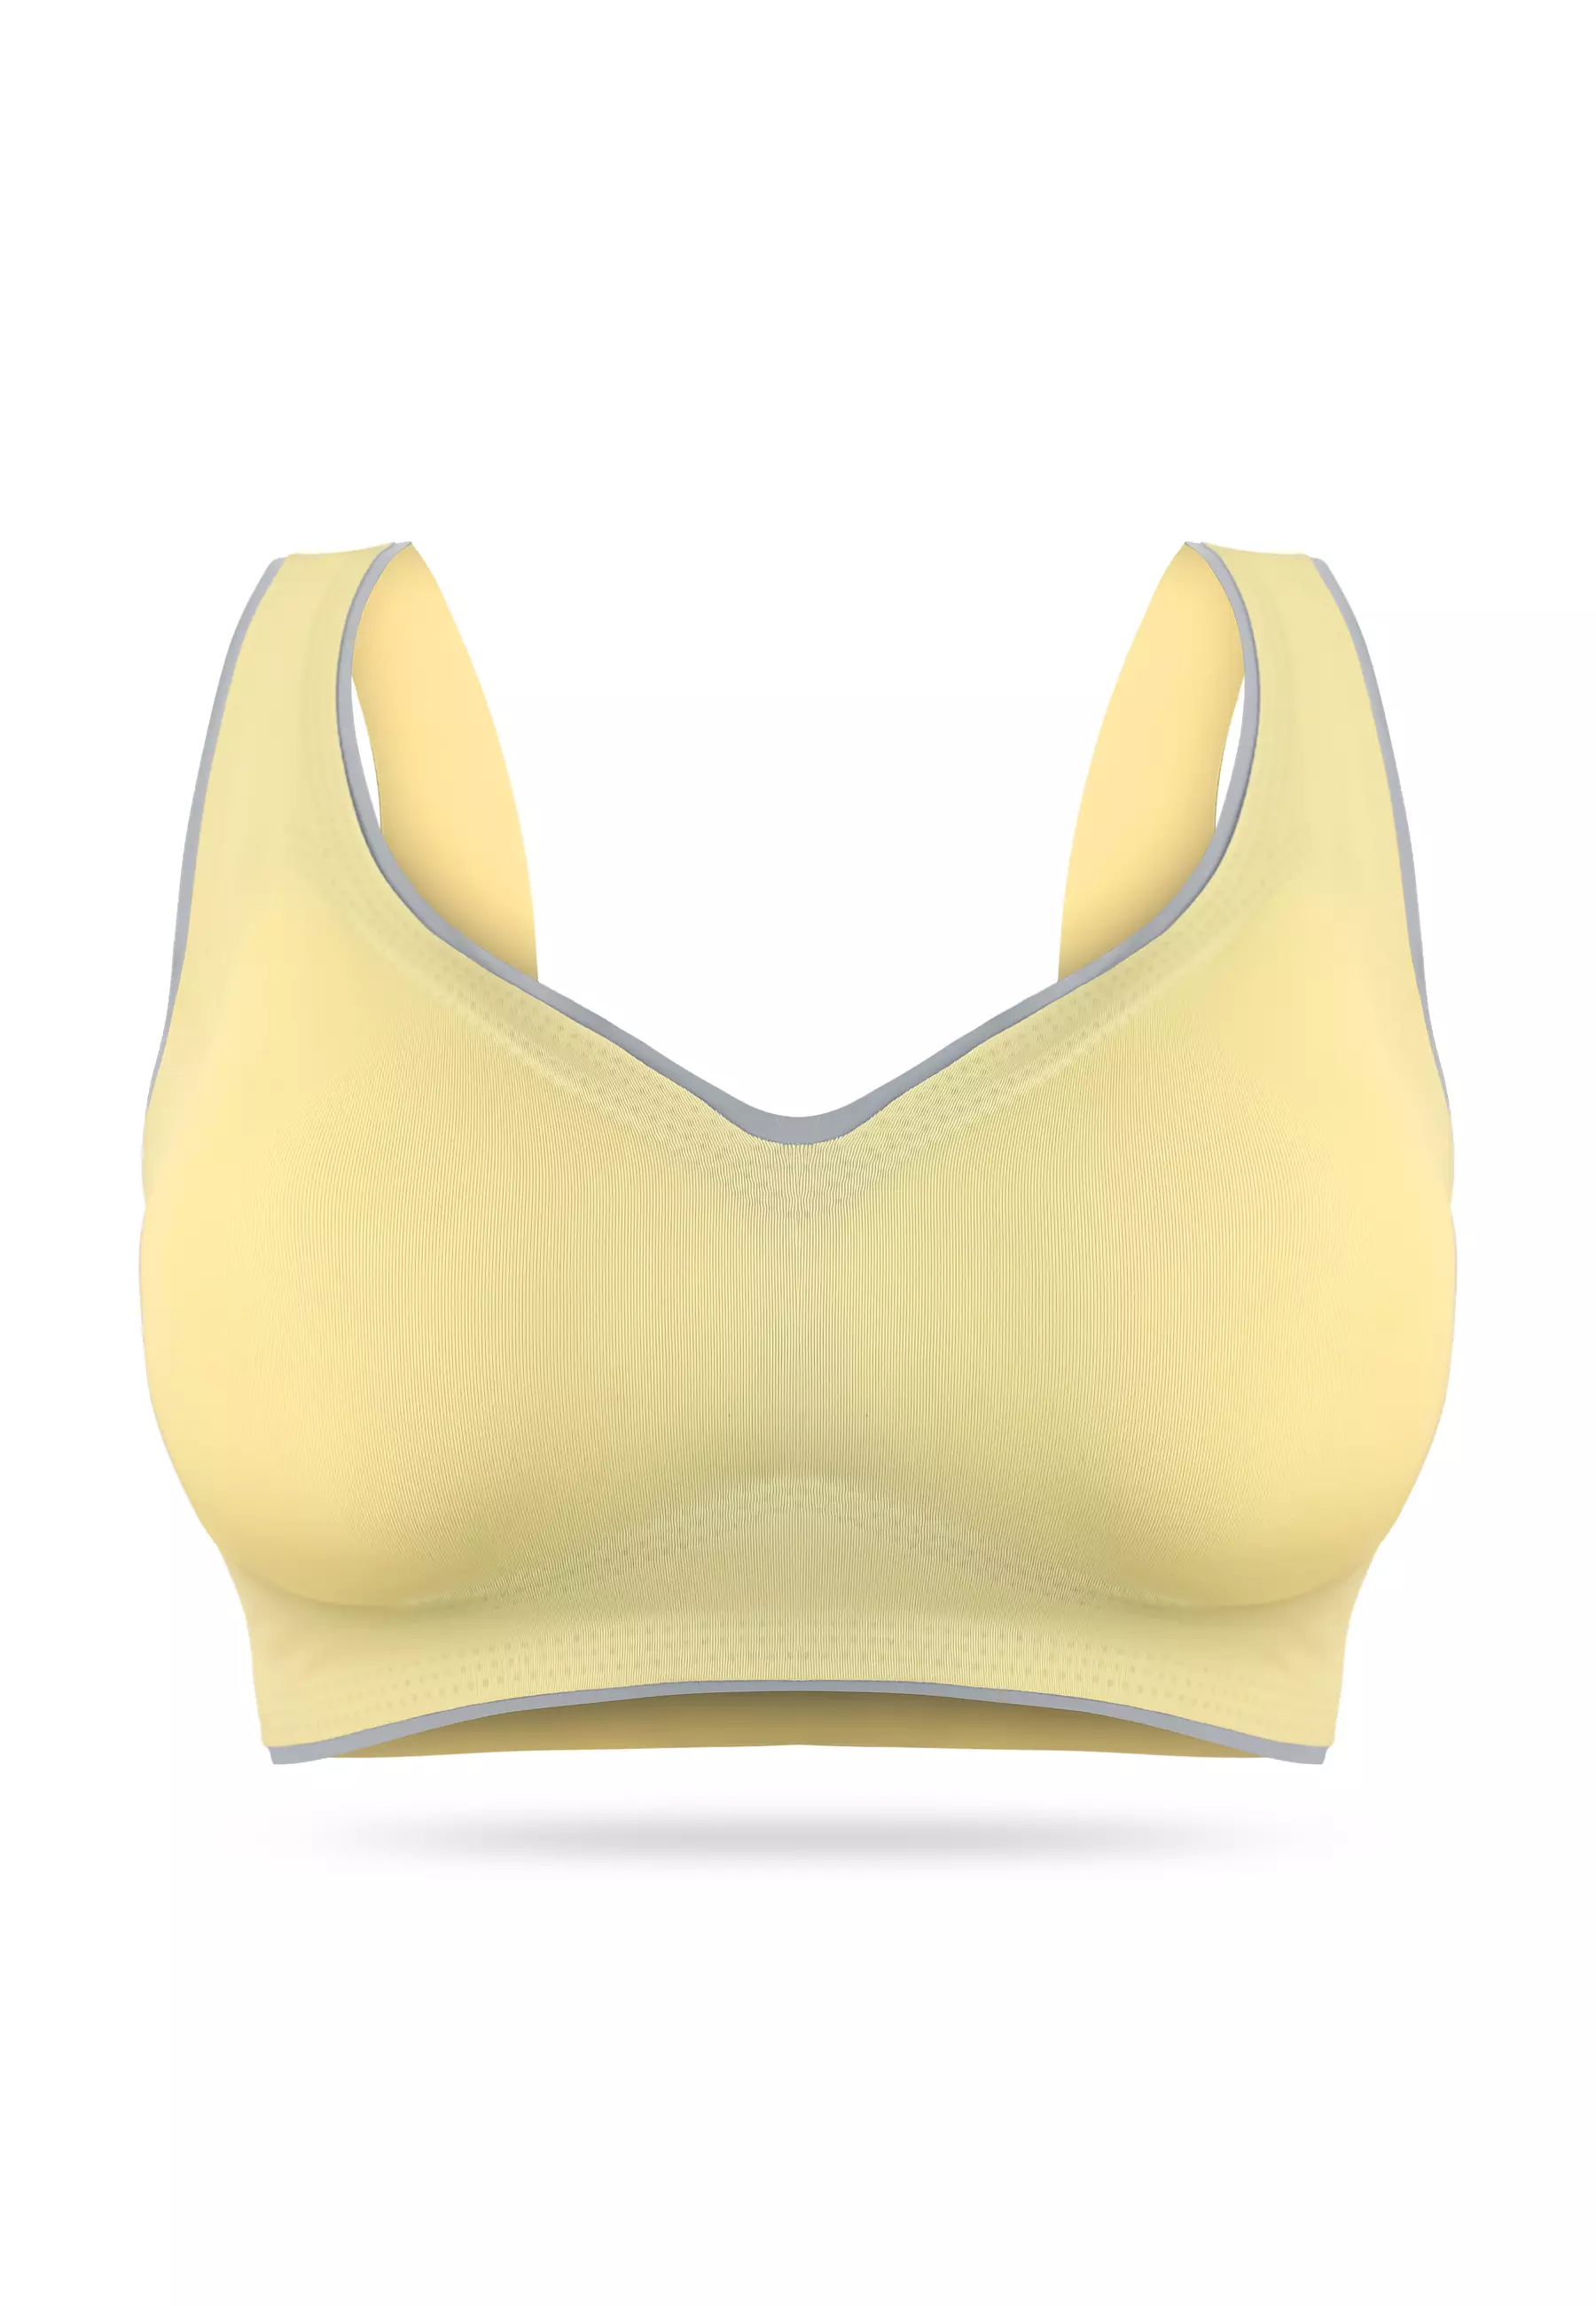 Jual Youhave You've (YouHave) BH Seamless Sport Bra Seamless Bra